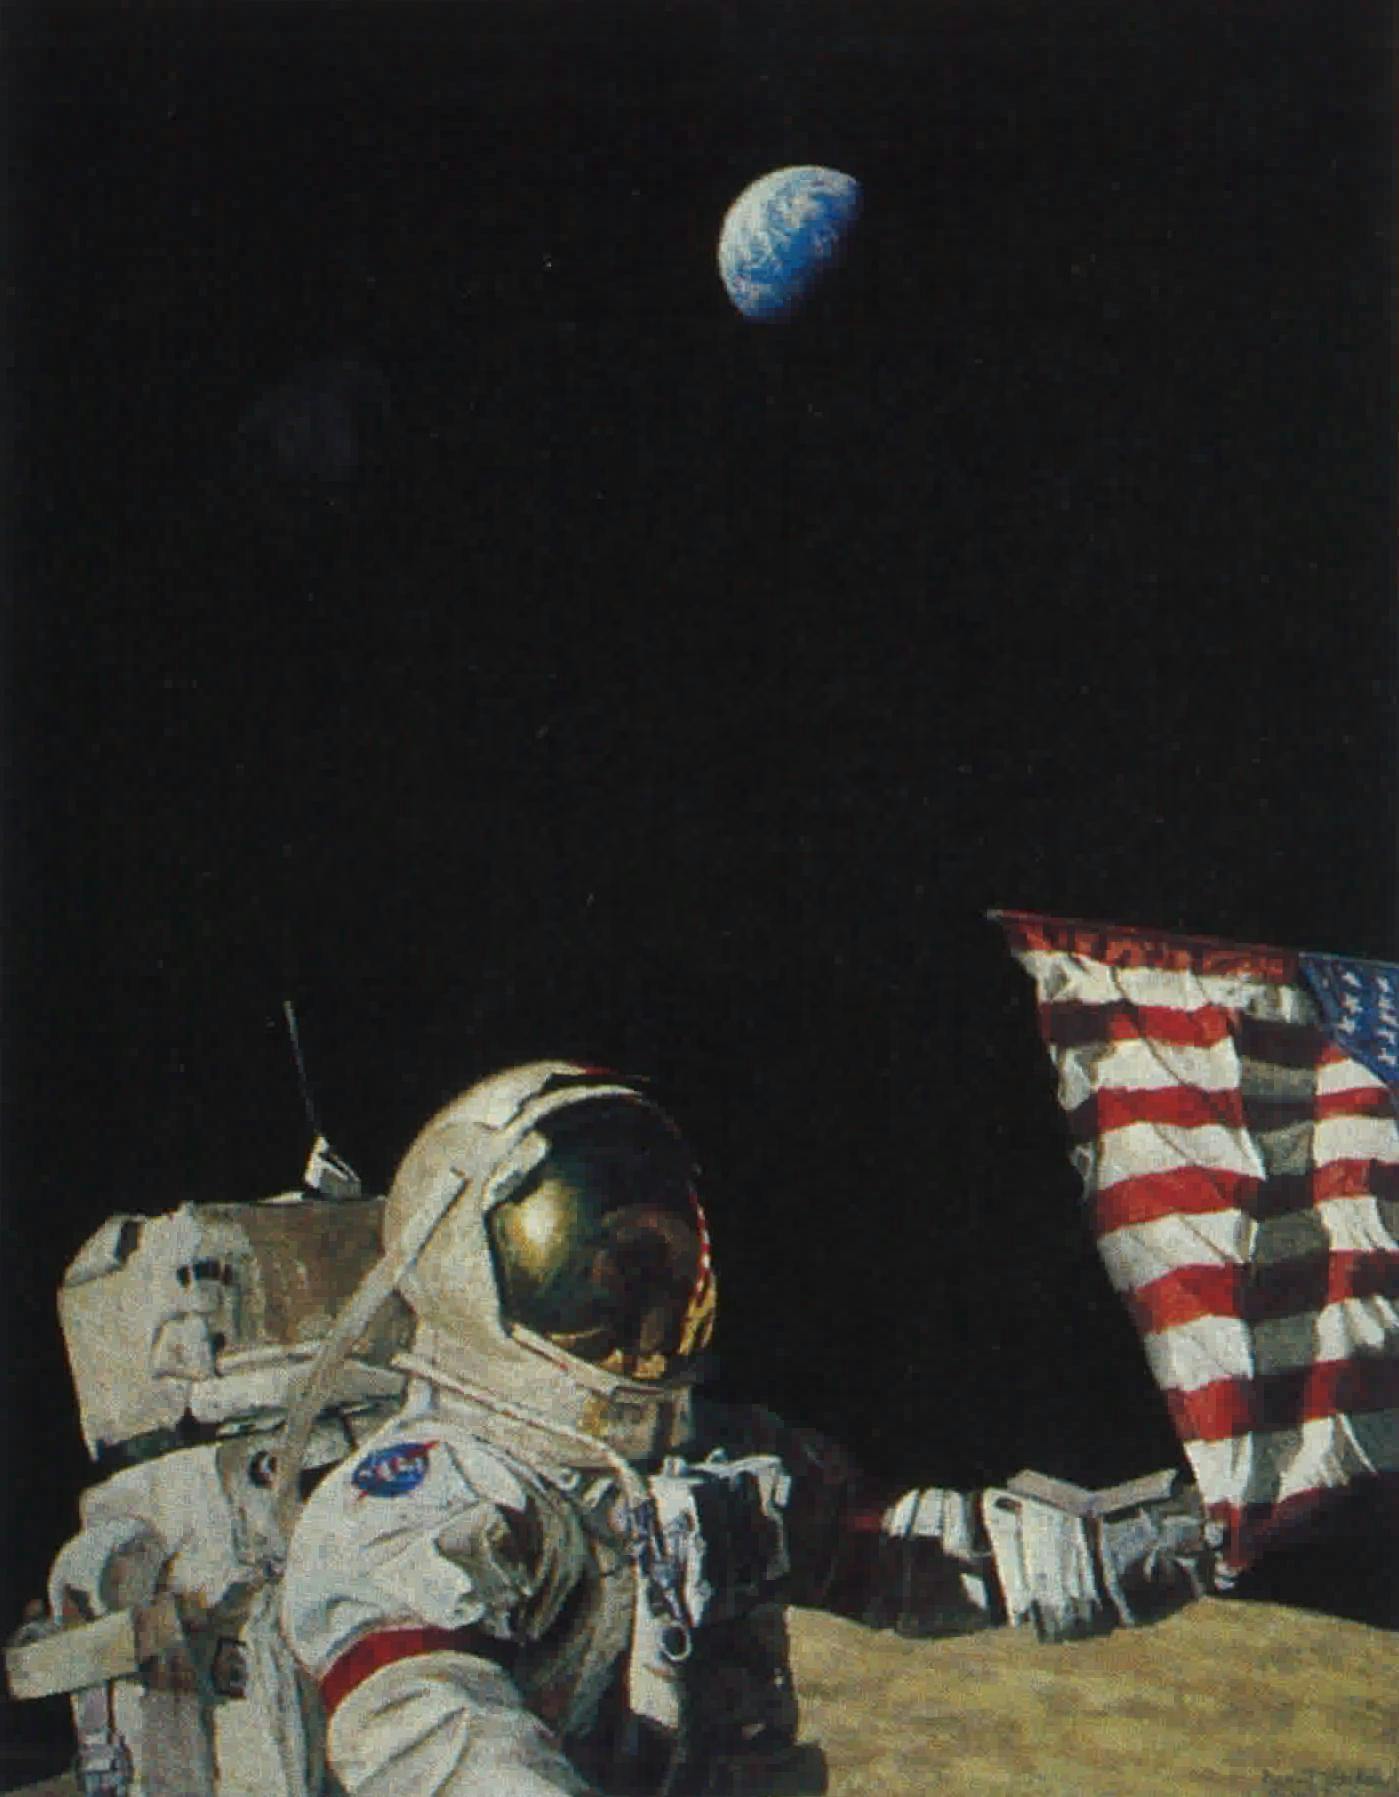 Too Beautiful to Have Happened By Accident, 1982 Bean did this painting after talking to Gene Cernan, who observed, "When I stood on the moon and looked up at the earth, I felt it was just too beautiful to have happened by accident. I could see all the fundamental elements that made up Apollo—the moon, the planet and country from which the first explorers came, deep, infinite space, and man himself. ”